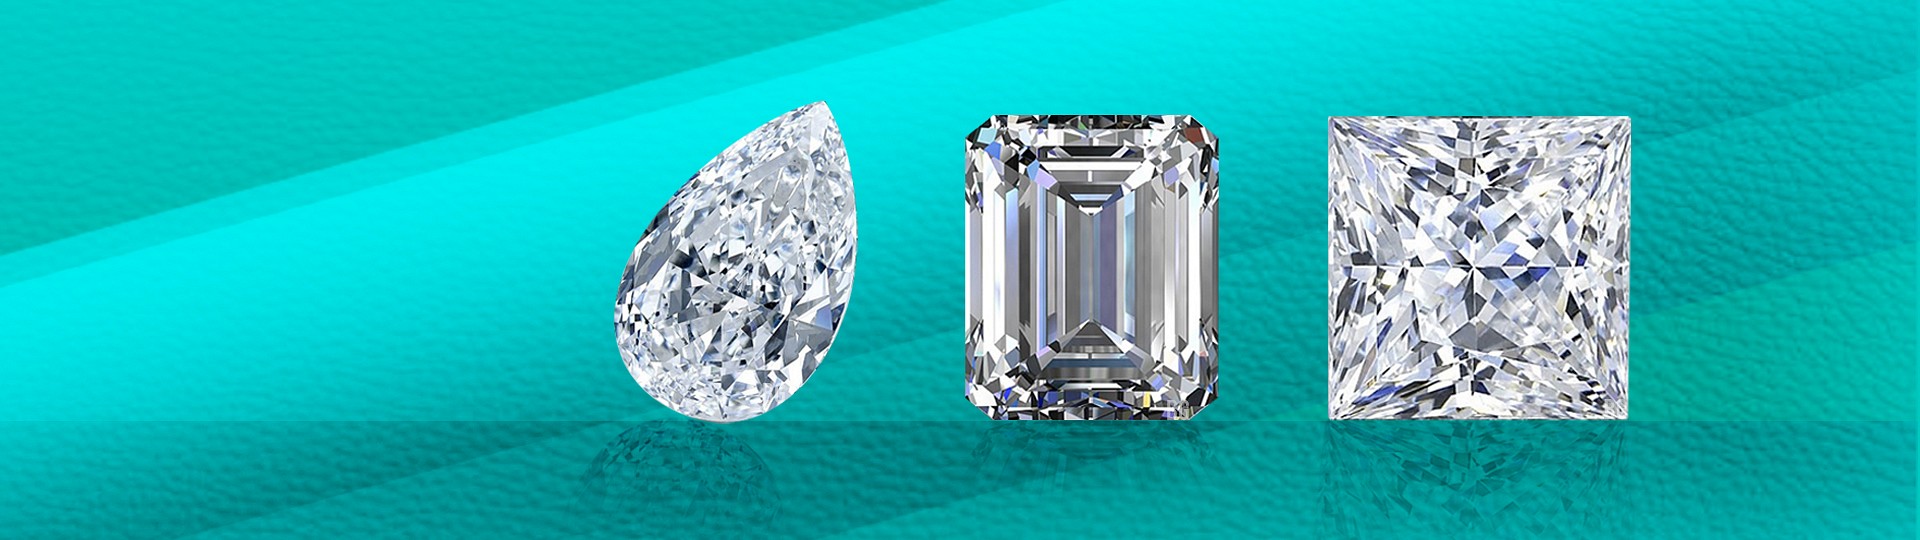 Investment | Rare GIA Natural Diamonds | Day 2 by Bid Global International Auctioneers LLC